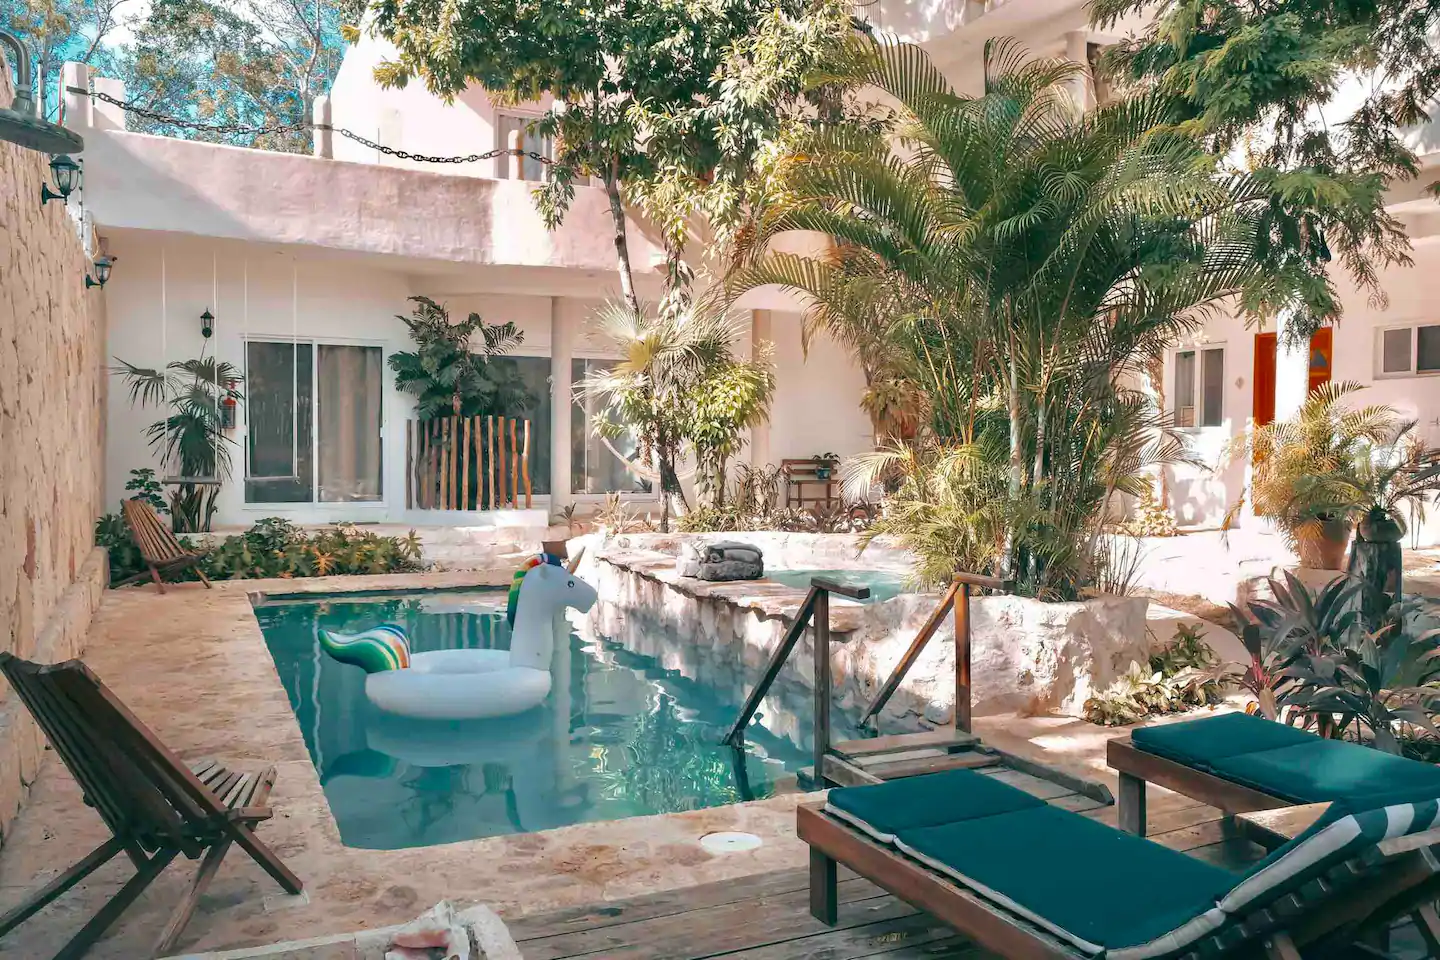 Stay at the Casita Maya Loft to enjoy one of the best Airbnbs in Tulum! This is view of the private pool and lush landscaping 